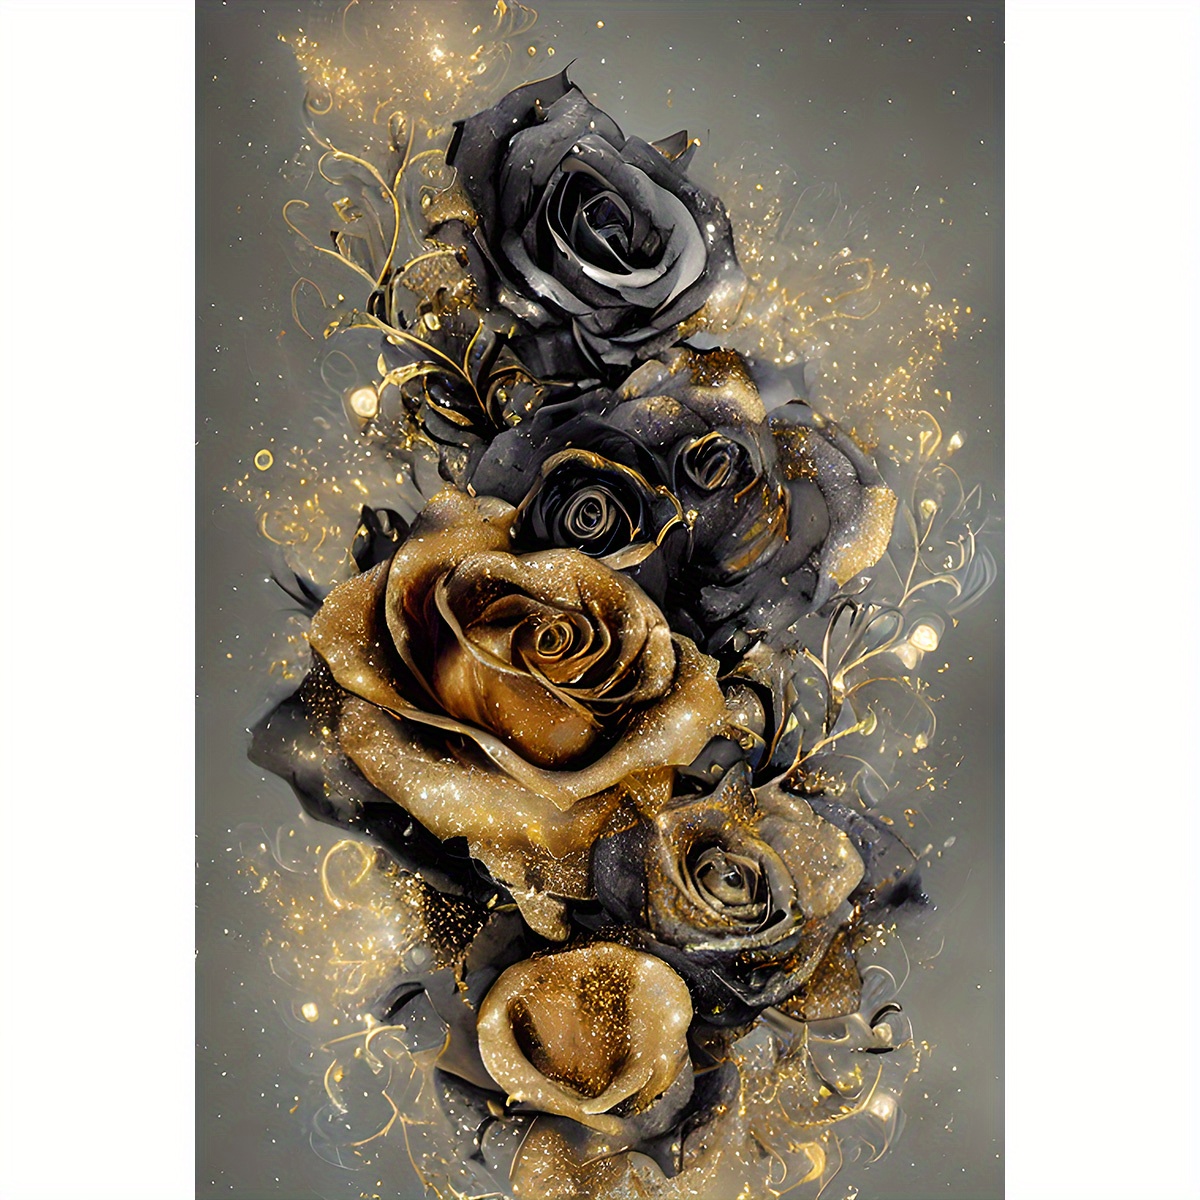 

1pc Flower Artificial Diamond Painting Kits For Adults Beginners, Black Golden Long Stem Rose 5d Full Round Diamond Painting For Gift Home Wall Decor, 20x30cm/7.9x11.8inch, Frameless